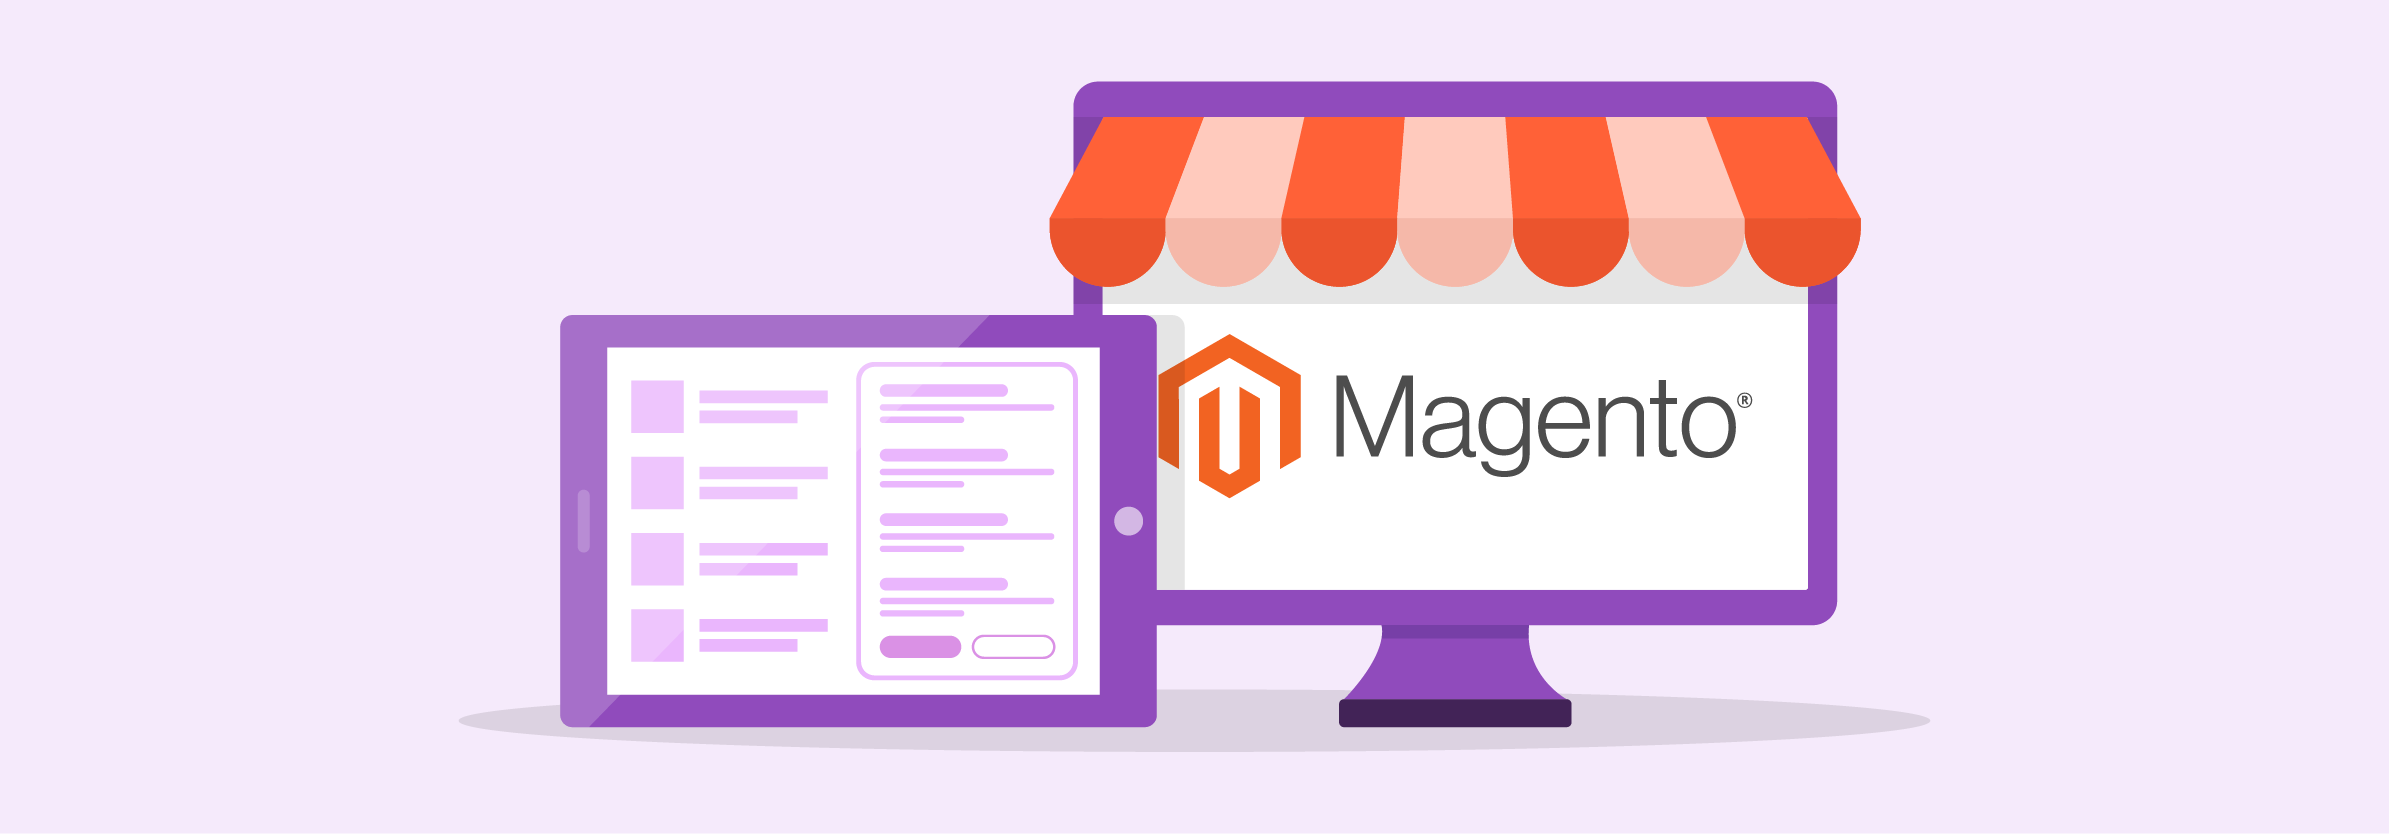 Overview of Magento Point of Sale system features and benefits